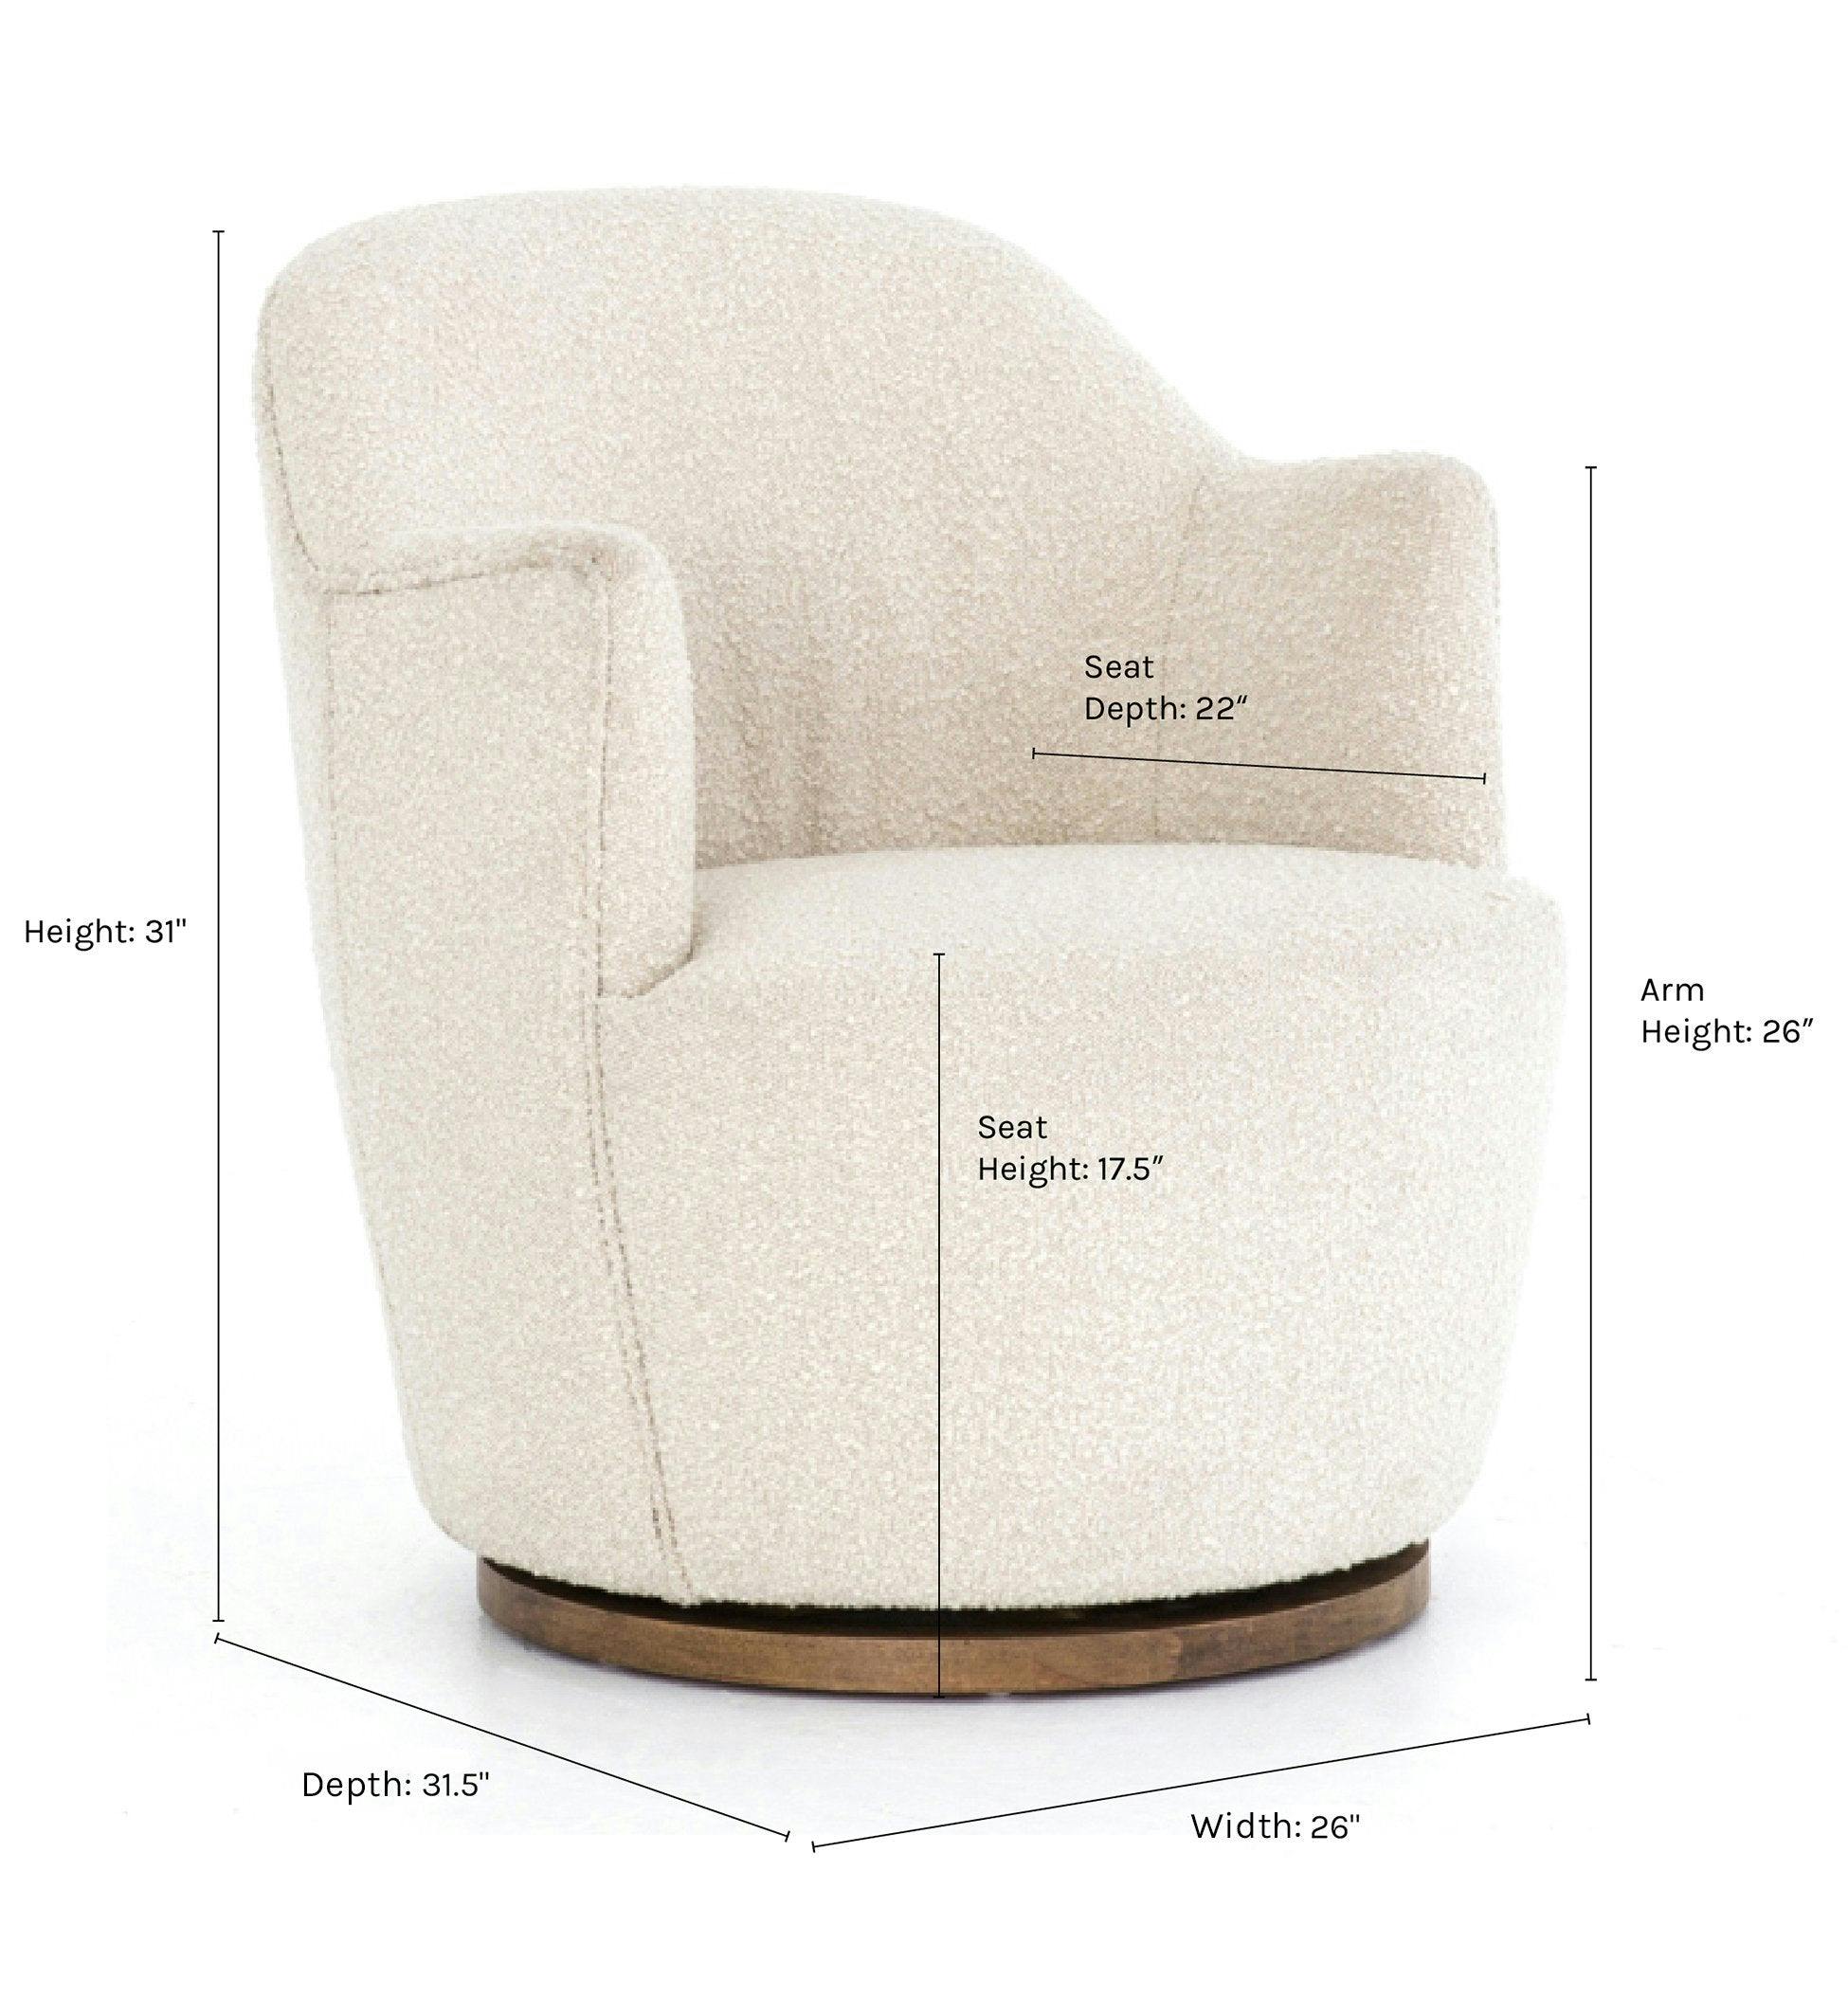 Margie Swivel Chair - Natural Boucle